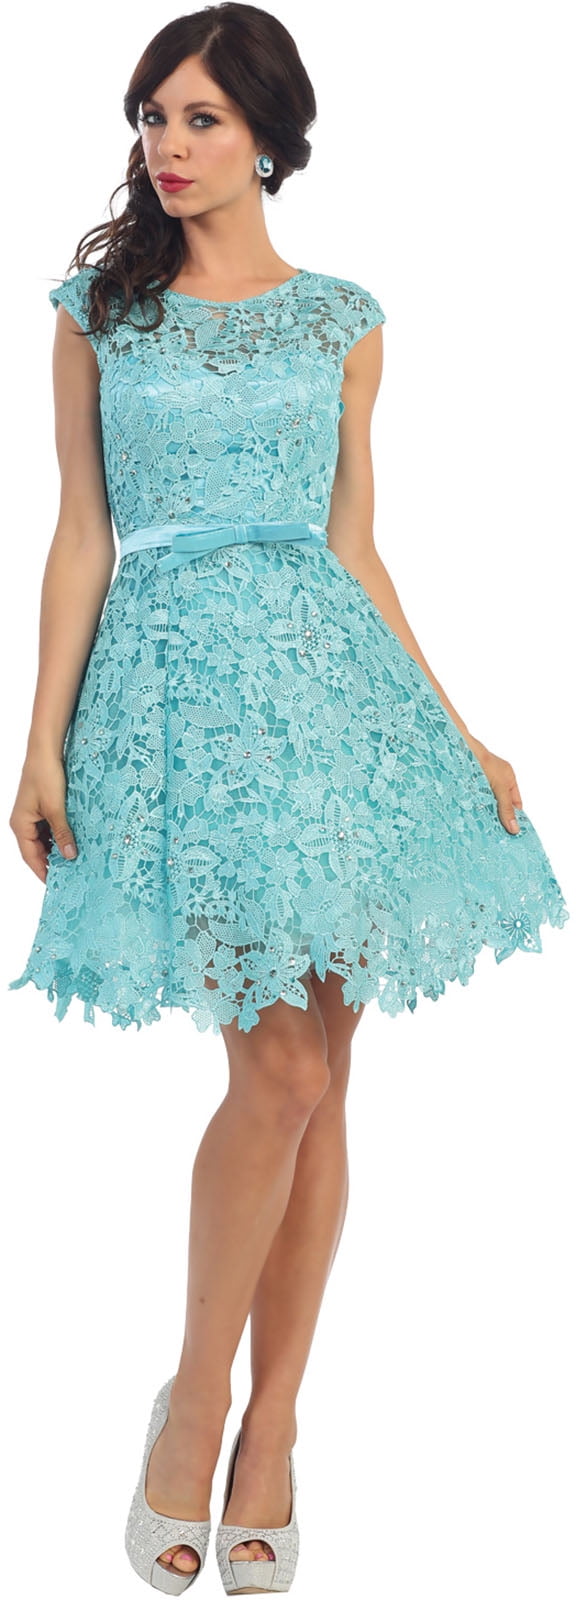 Discover 77+ short dress patterns with lace best